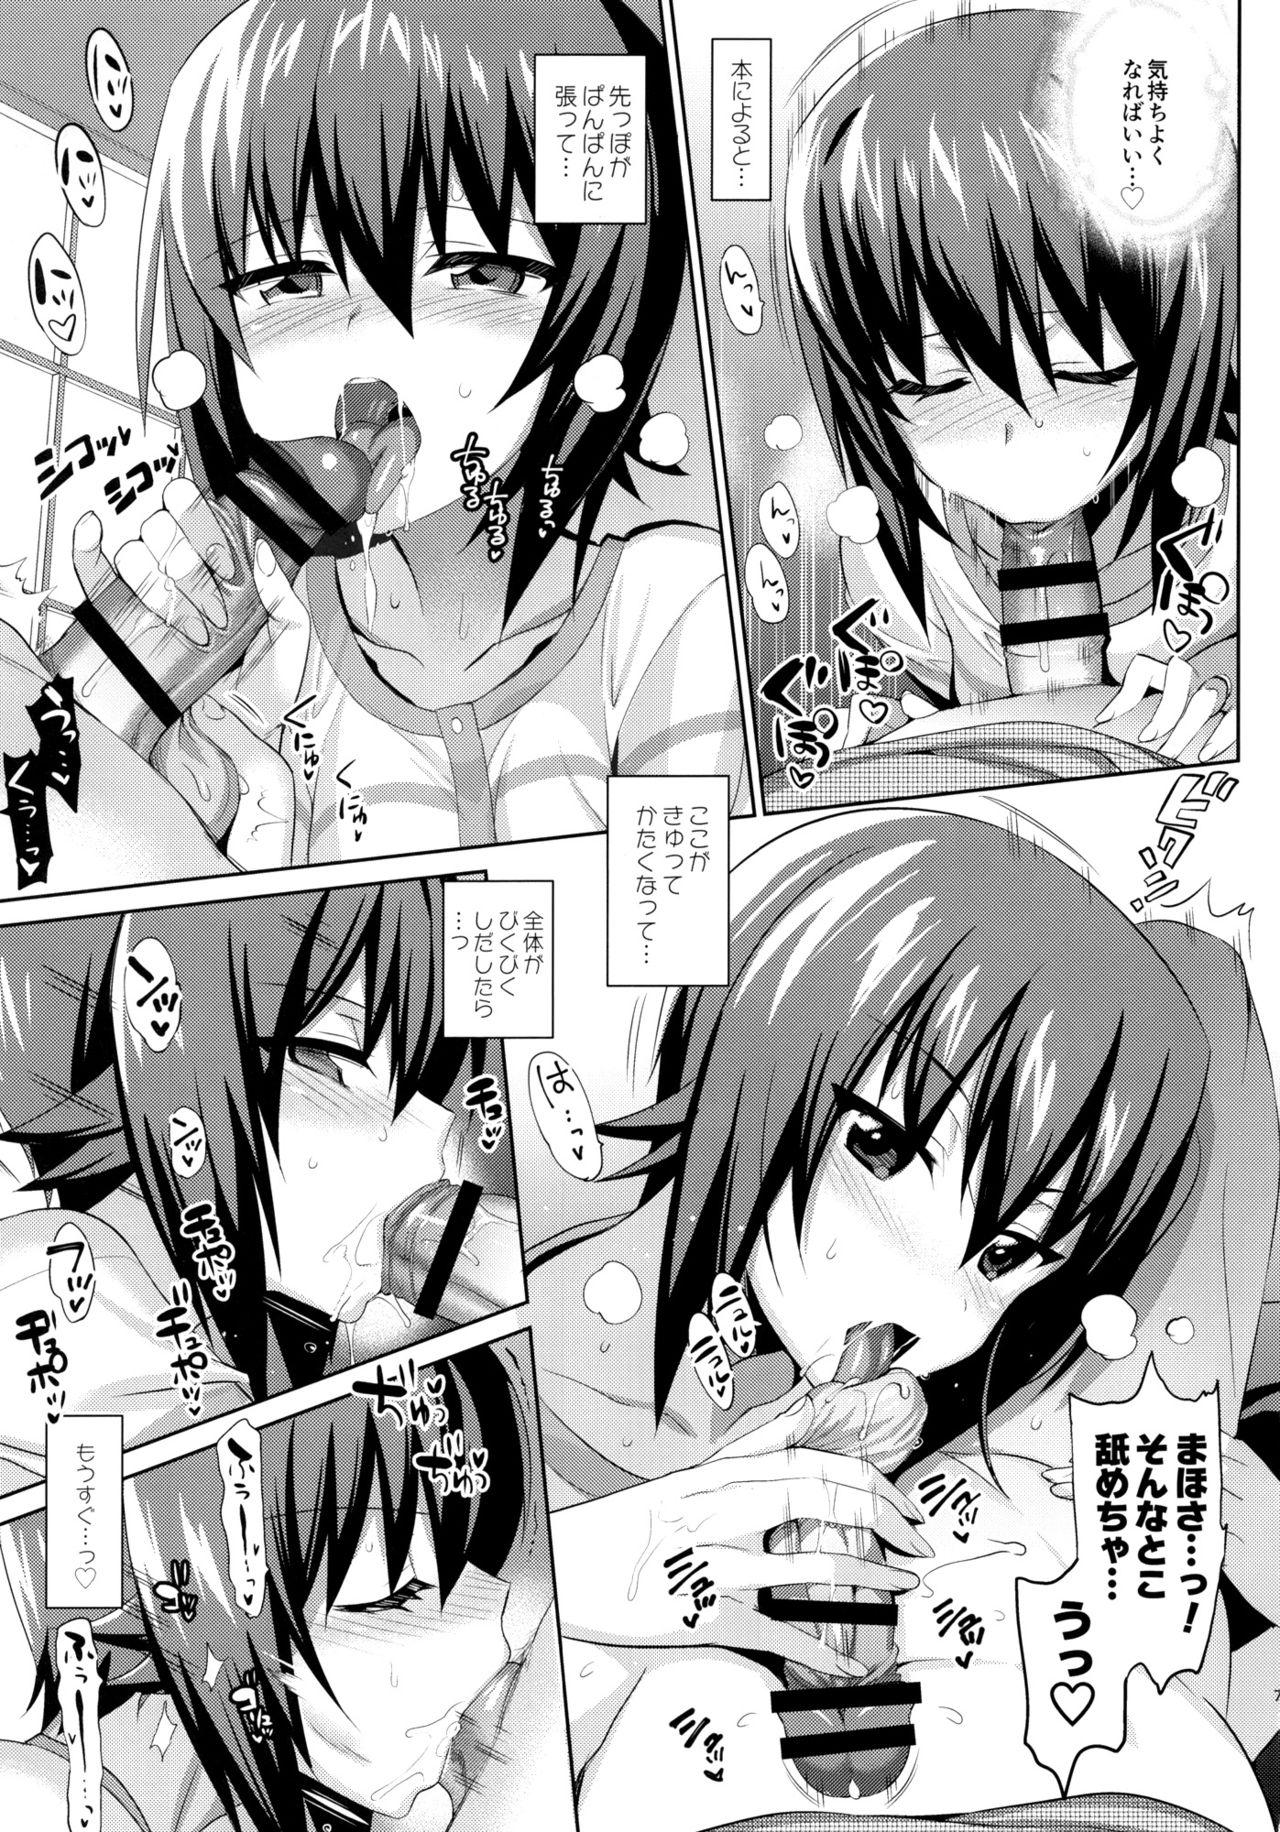 Pmv LET ME LOVE YOU TOO - Girls und panzer Fishnet - Page 6